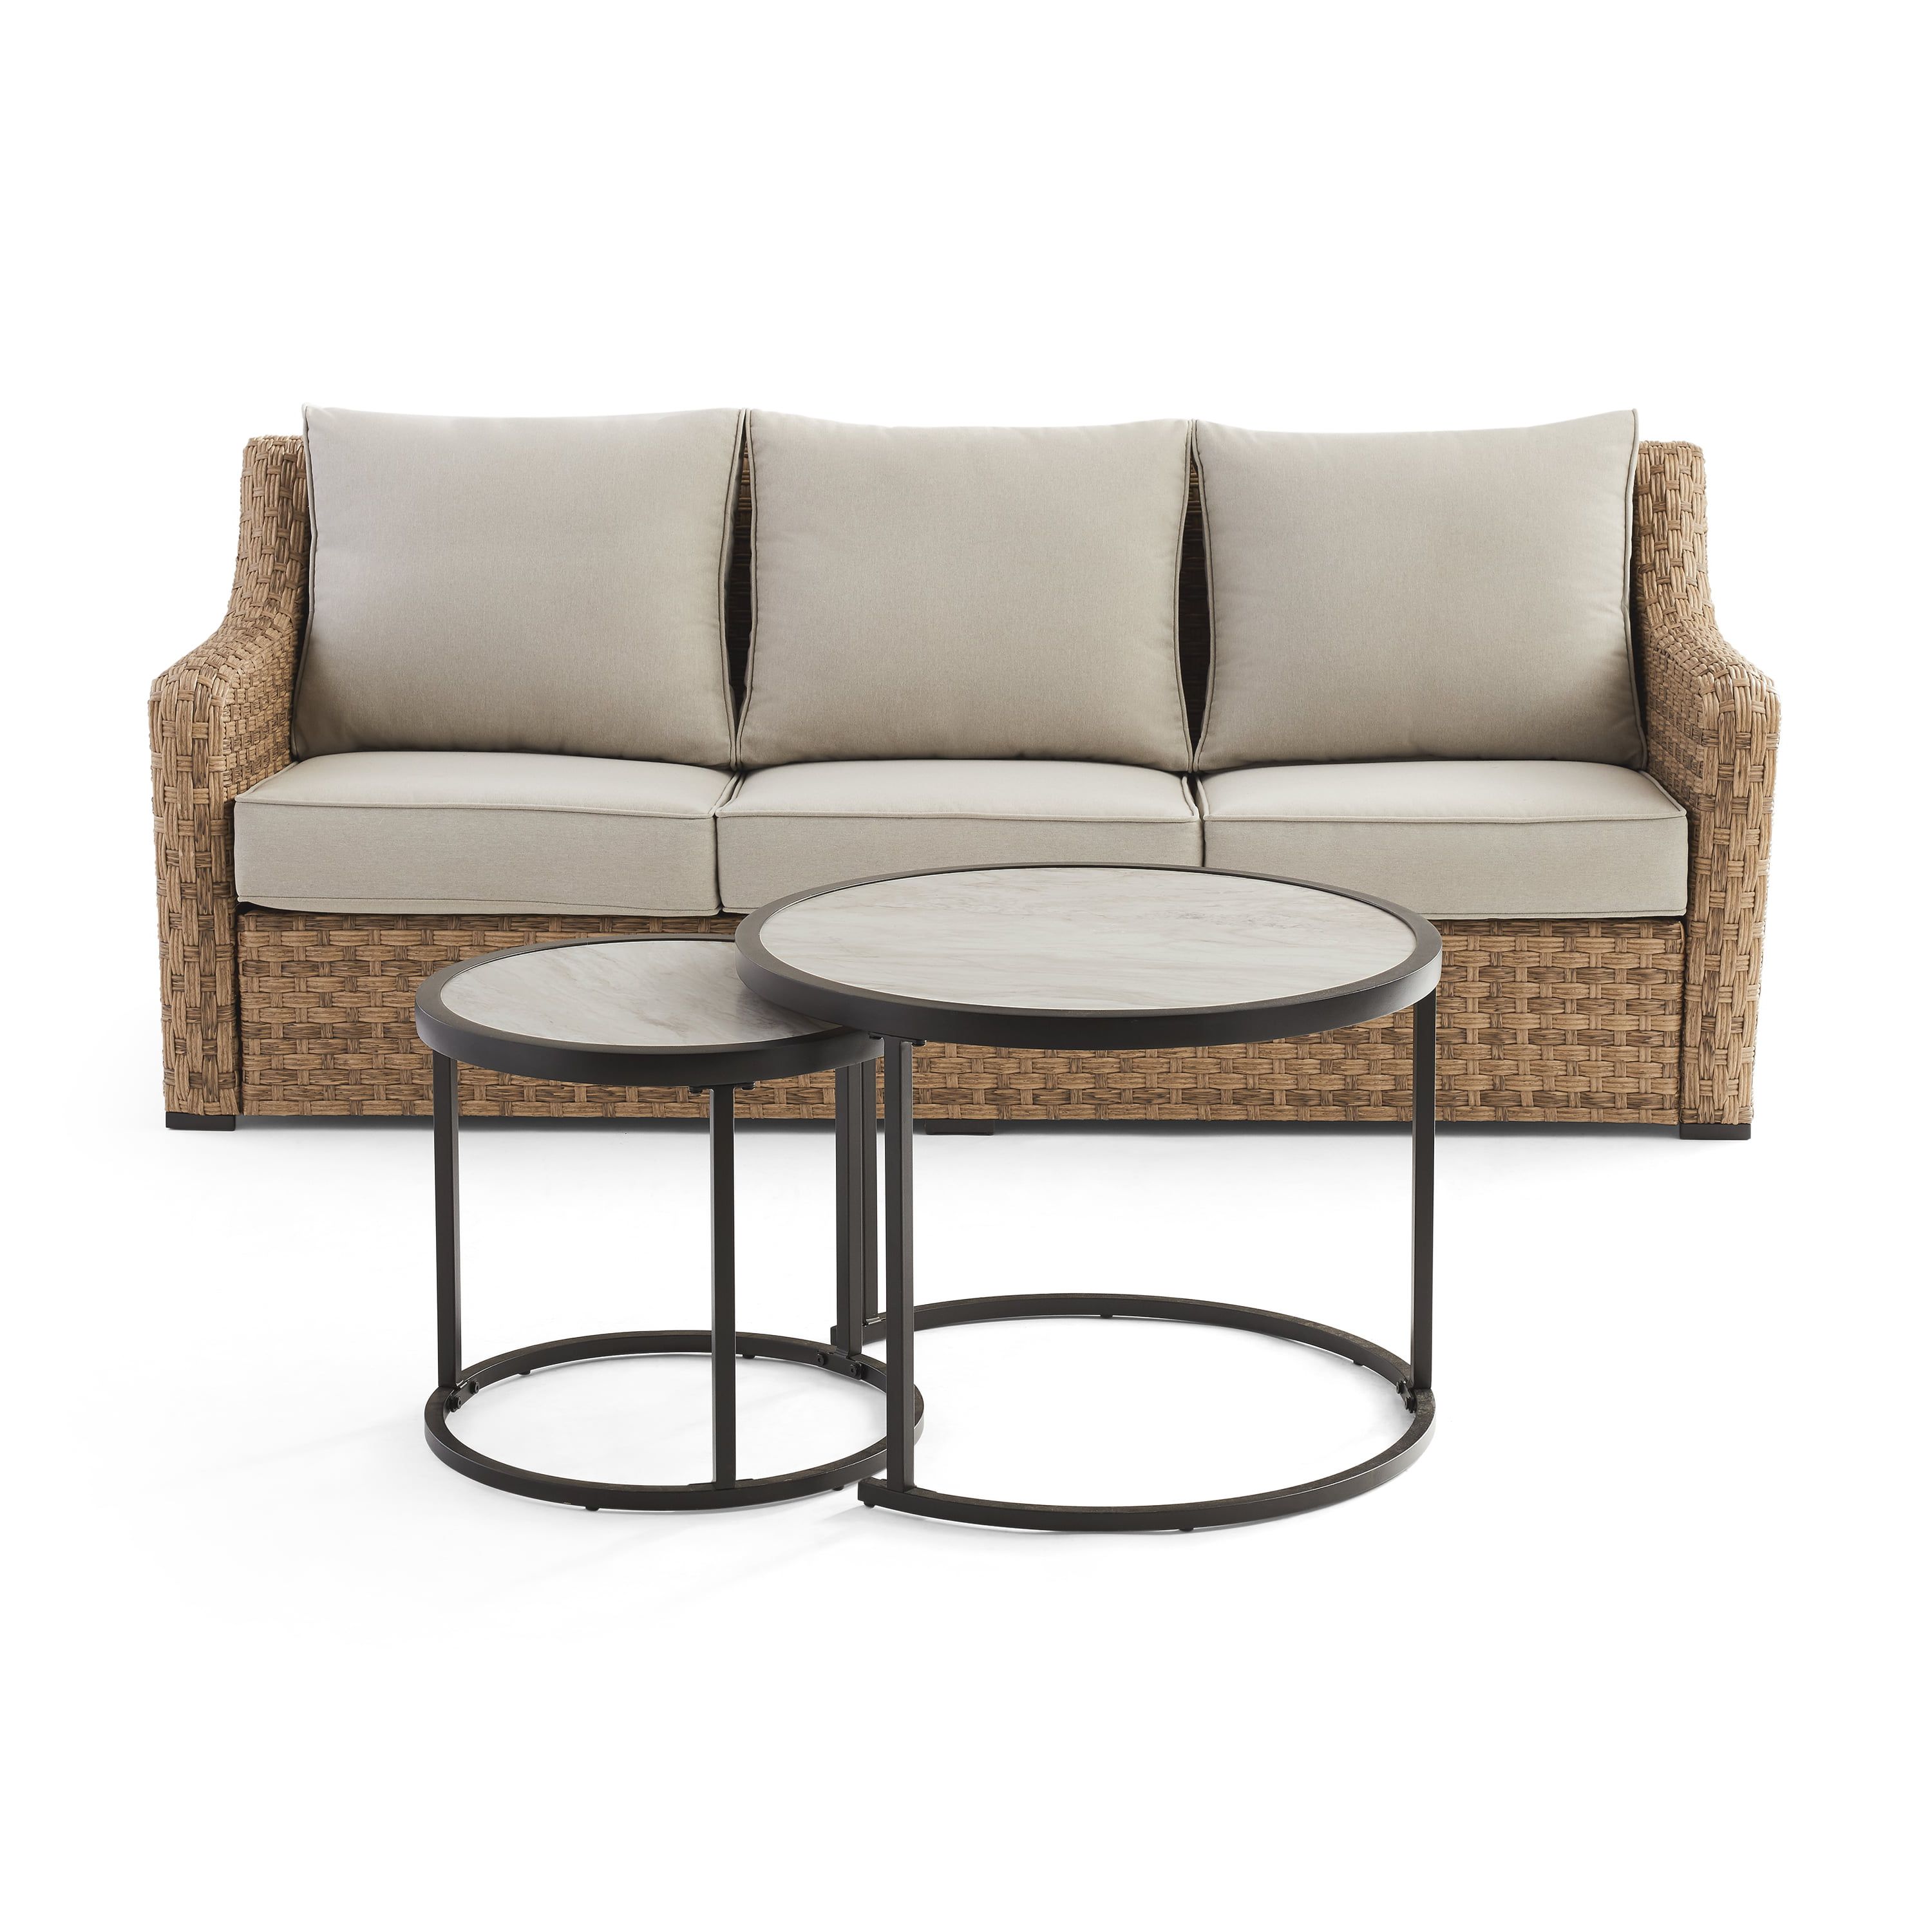 Well Known Better Homes & Gardens River Oaks 3 Piece Sofa & Nesting Table Set With  Patio Cover – Walmart Pertaining To 3 Piece Sofa & Nesting Table Set (View 3 of 15)